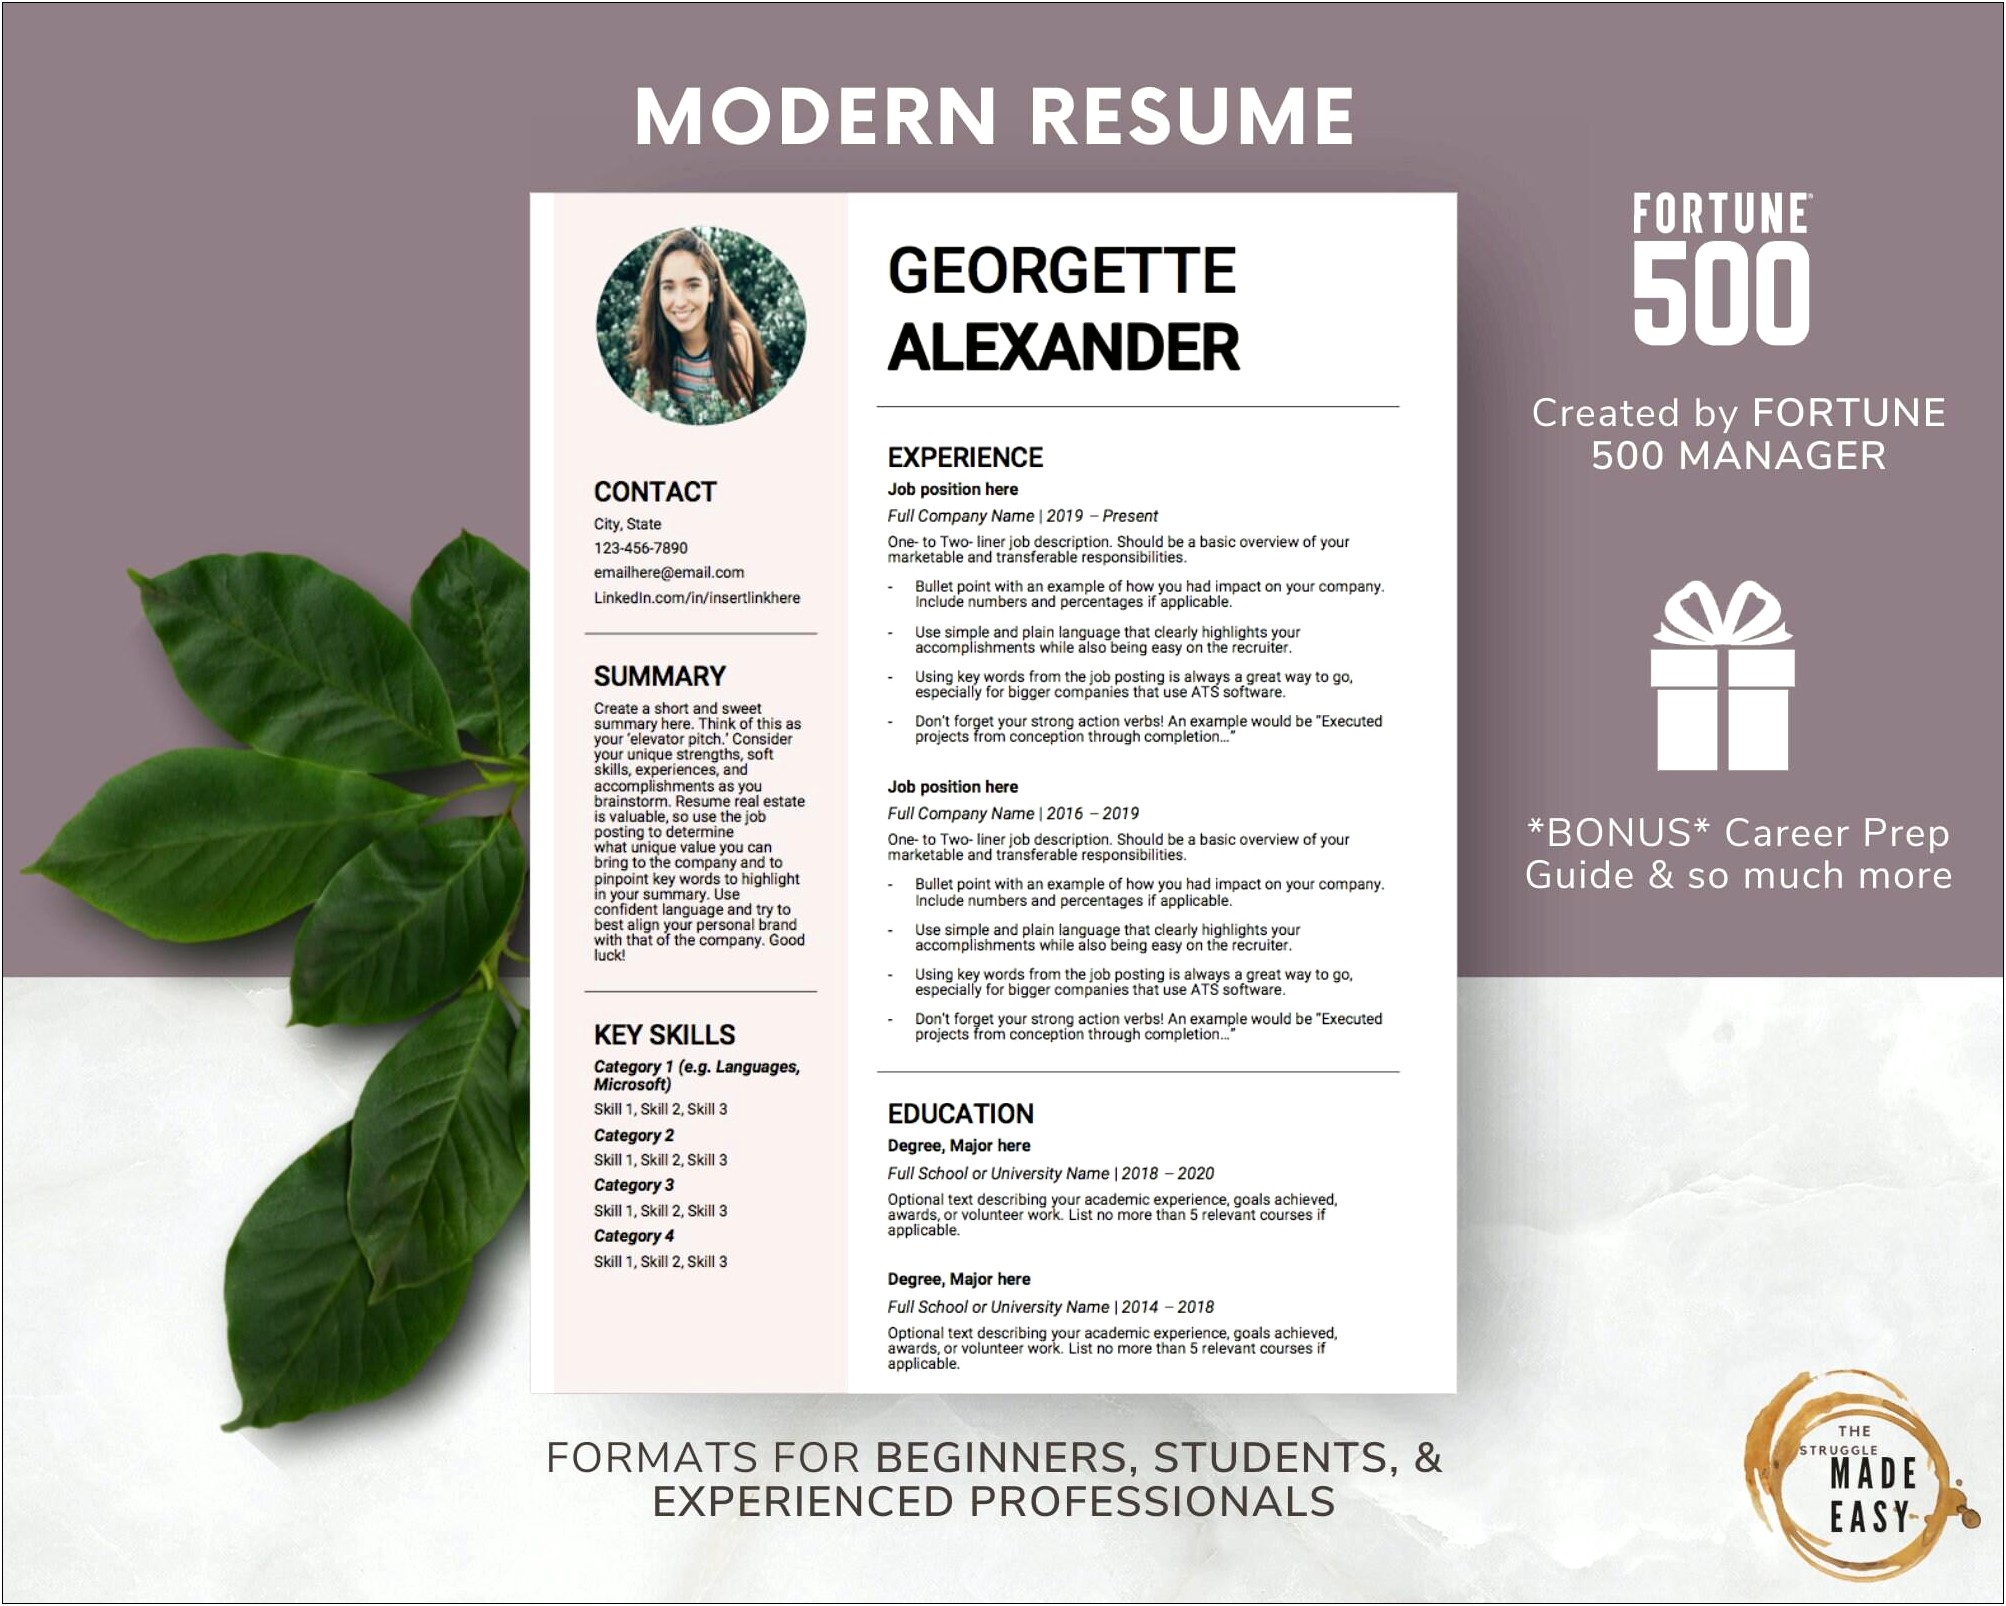 Best Resume For Fortune 500 Companies